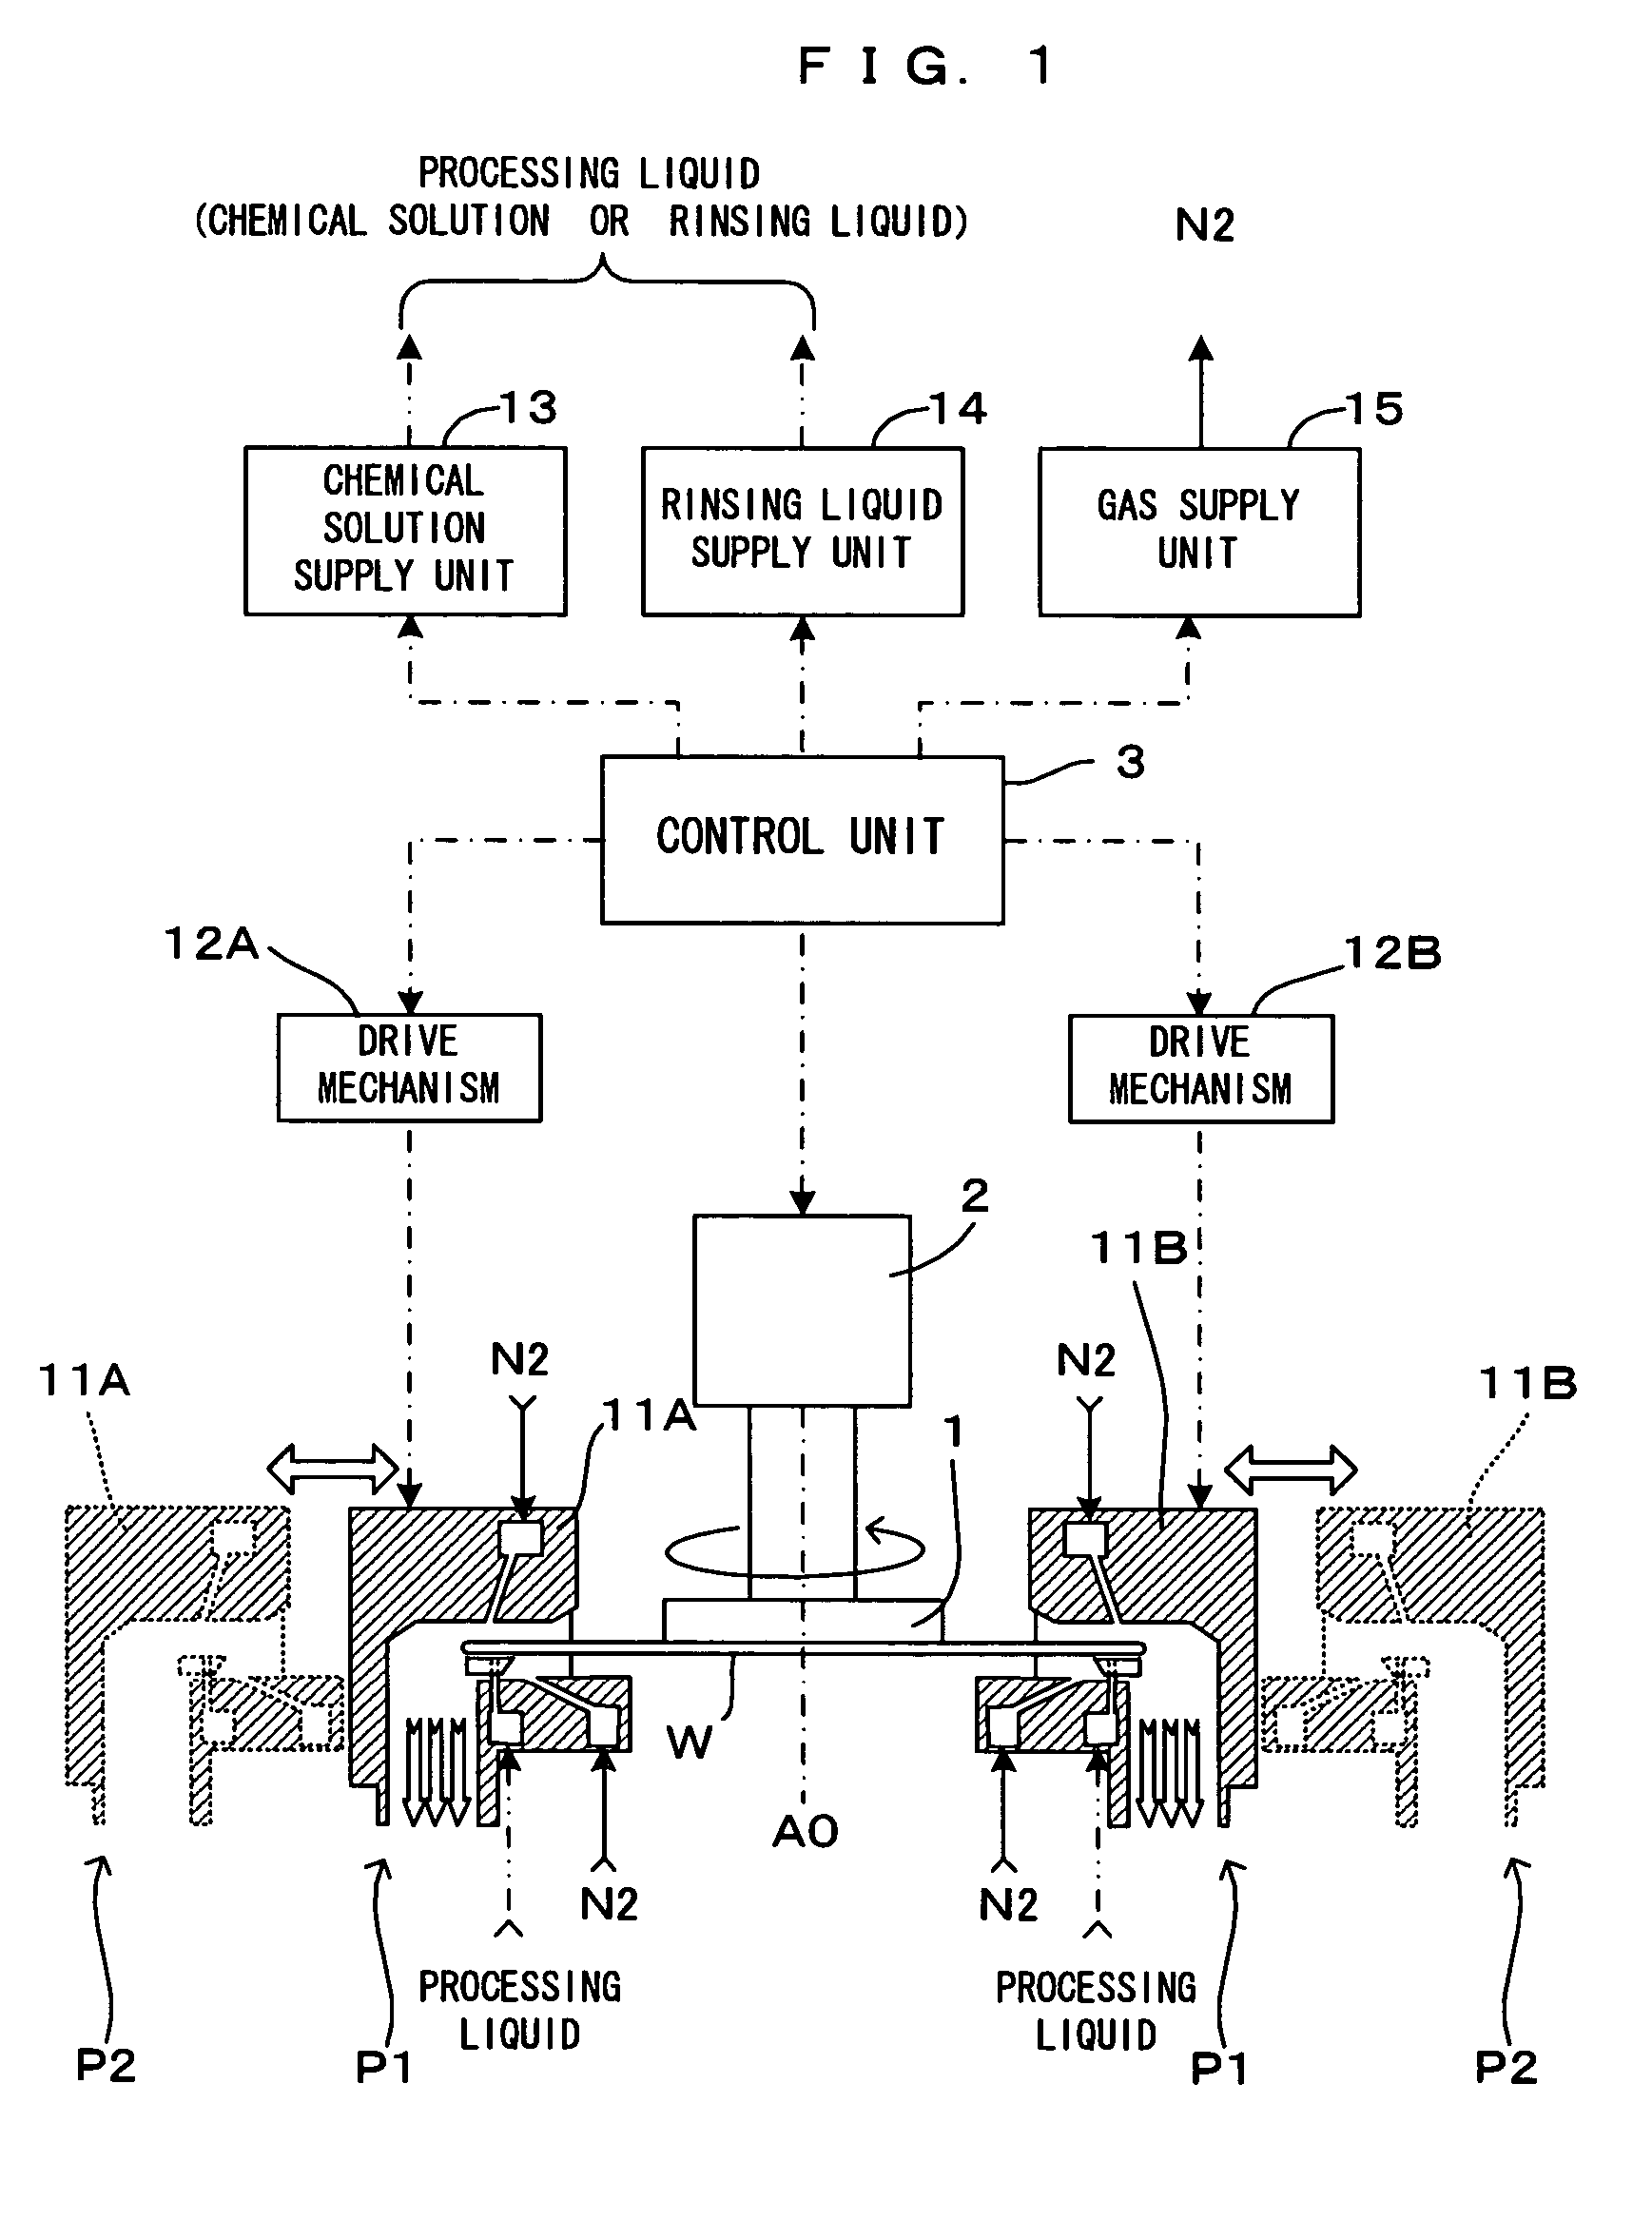 Substrate processing apparatus for treating substrate with predetermined processing by supplying processing liquid to rim portion of rotating substrate